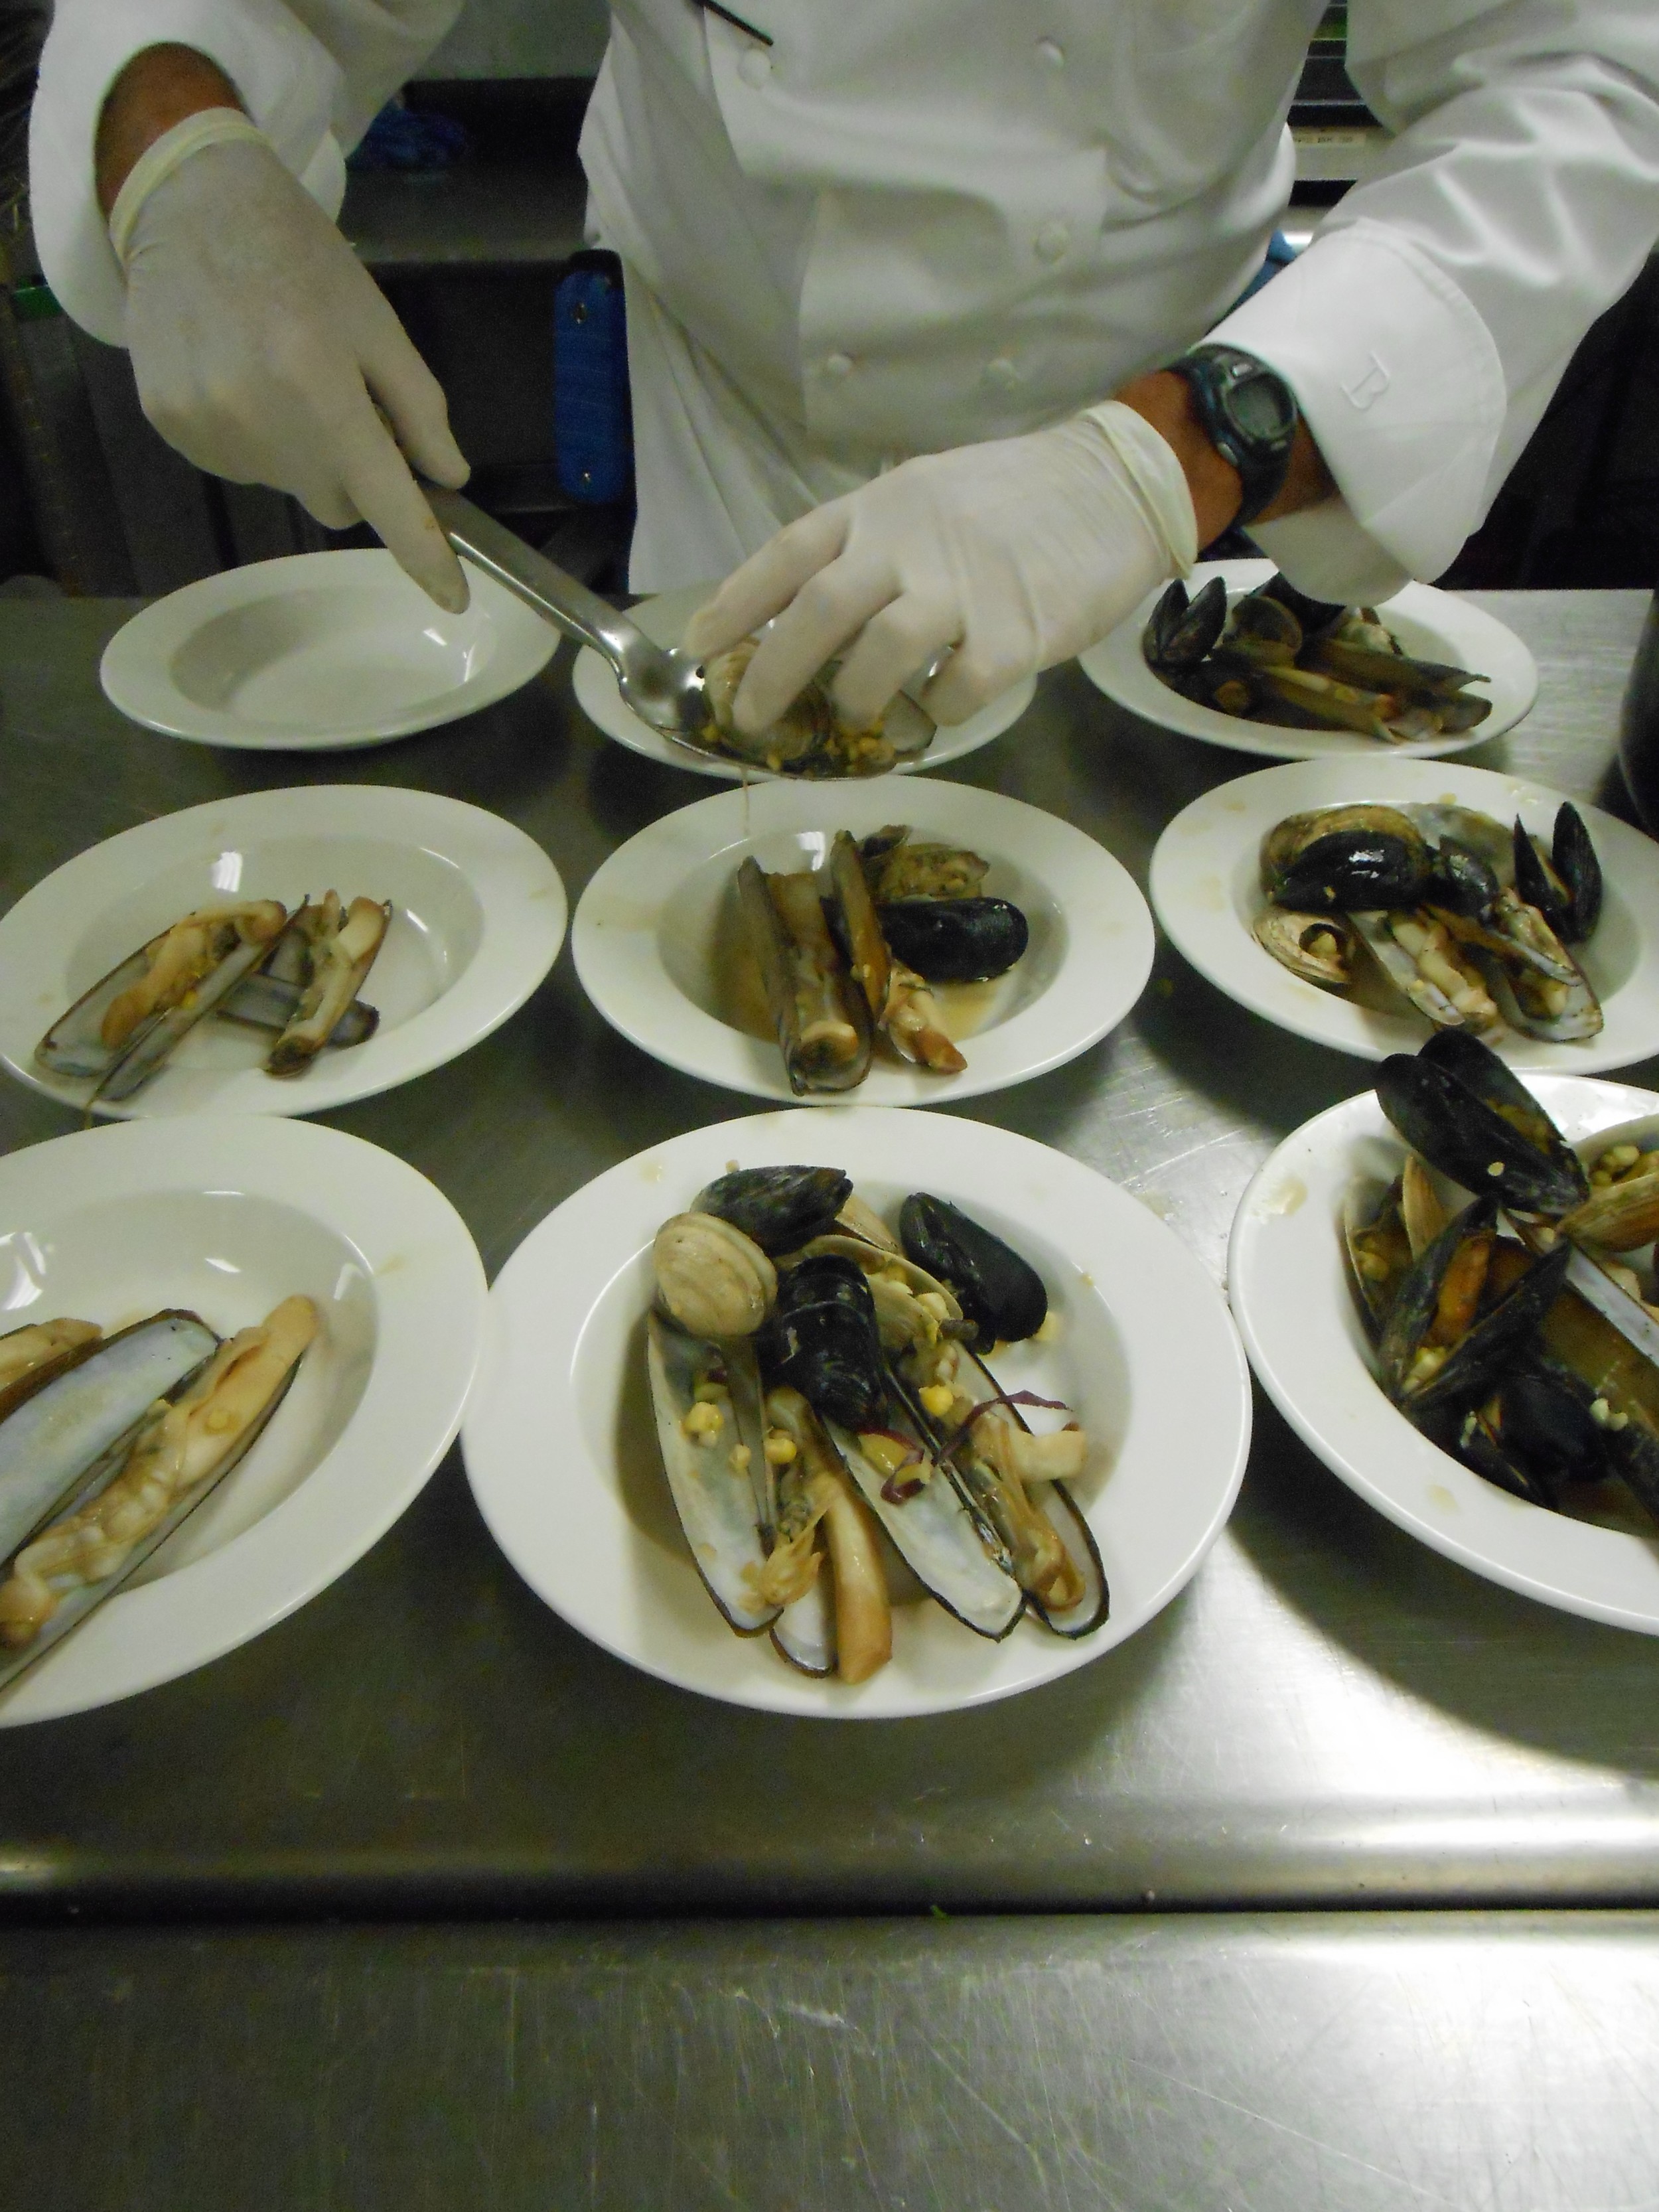 Steamers, Razor Clams and Mussels with Verrill Farm Sweet Corn, Potatoes and Pigs Ear Brown Ale